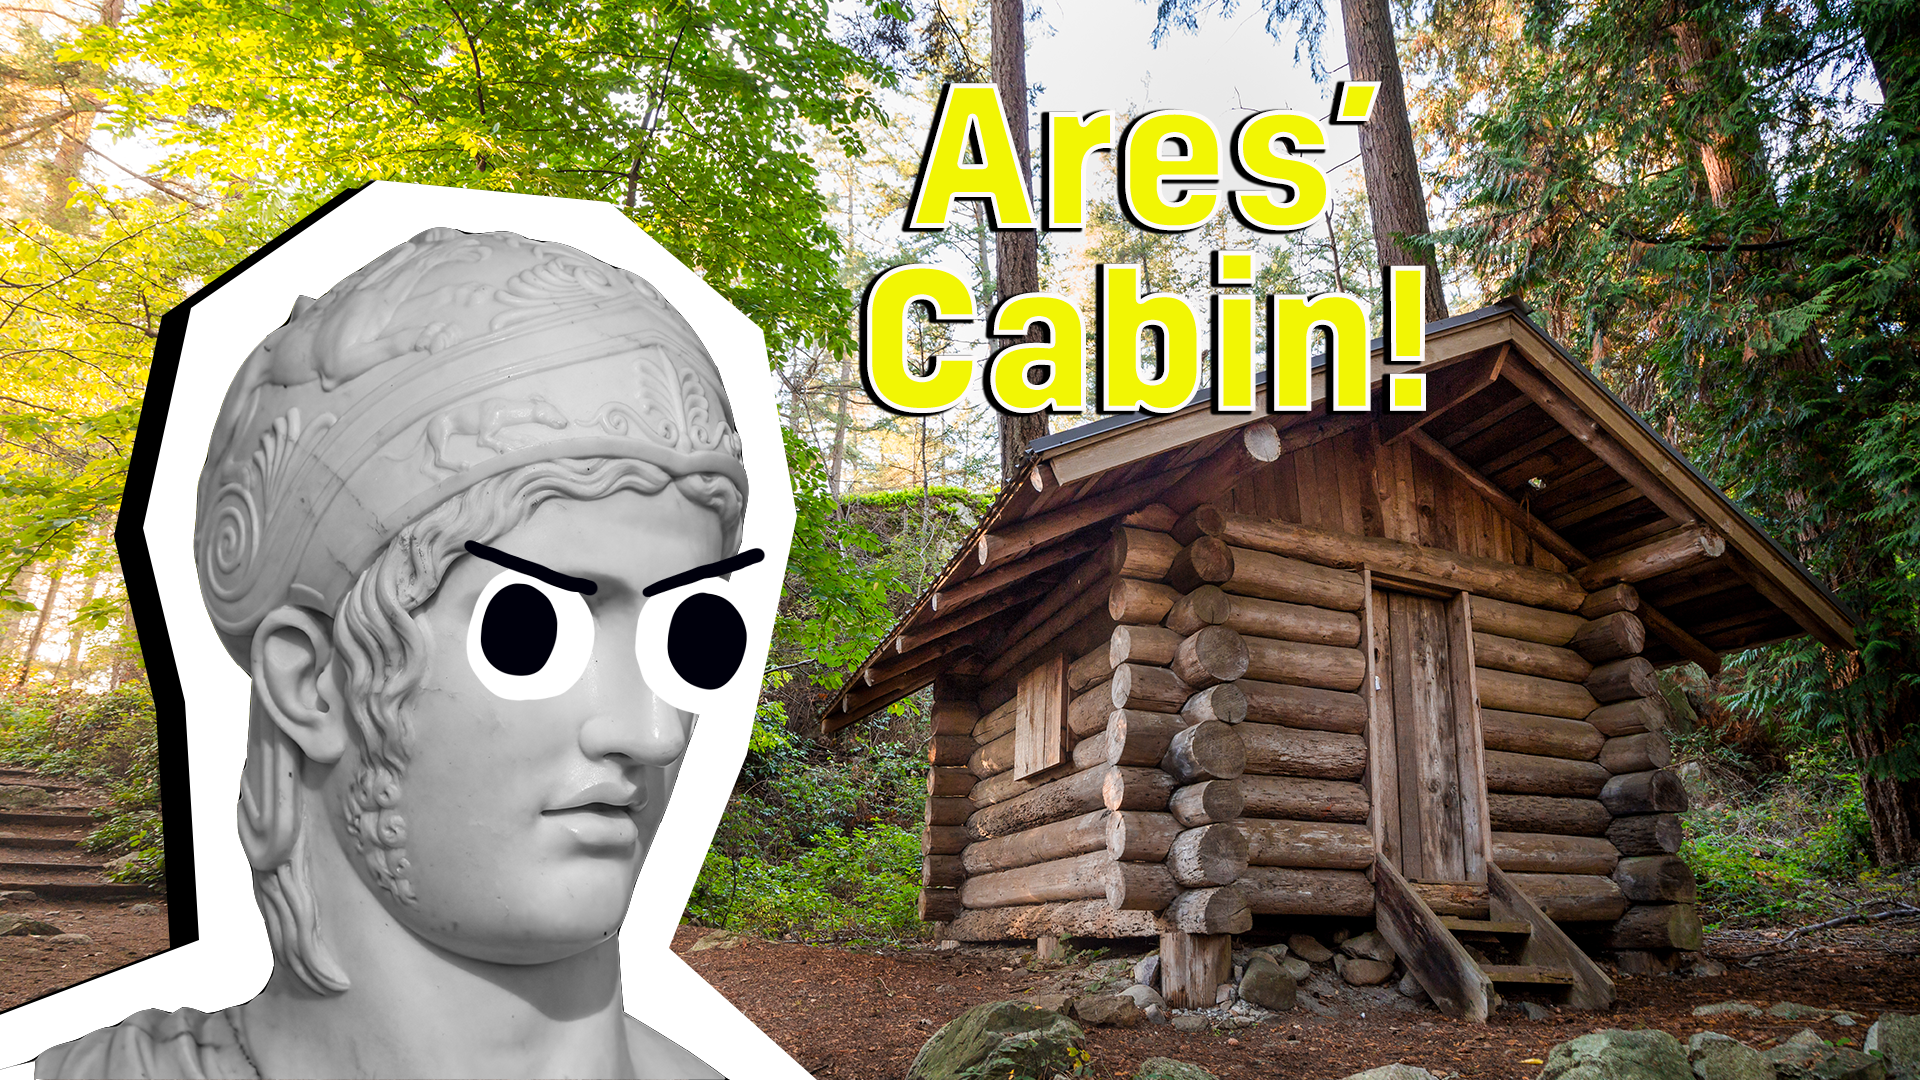 Which Camp Half-blood Cabin Do You Belong In? (Based On The Percy Jackson  Series) - ProProfs Quiz